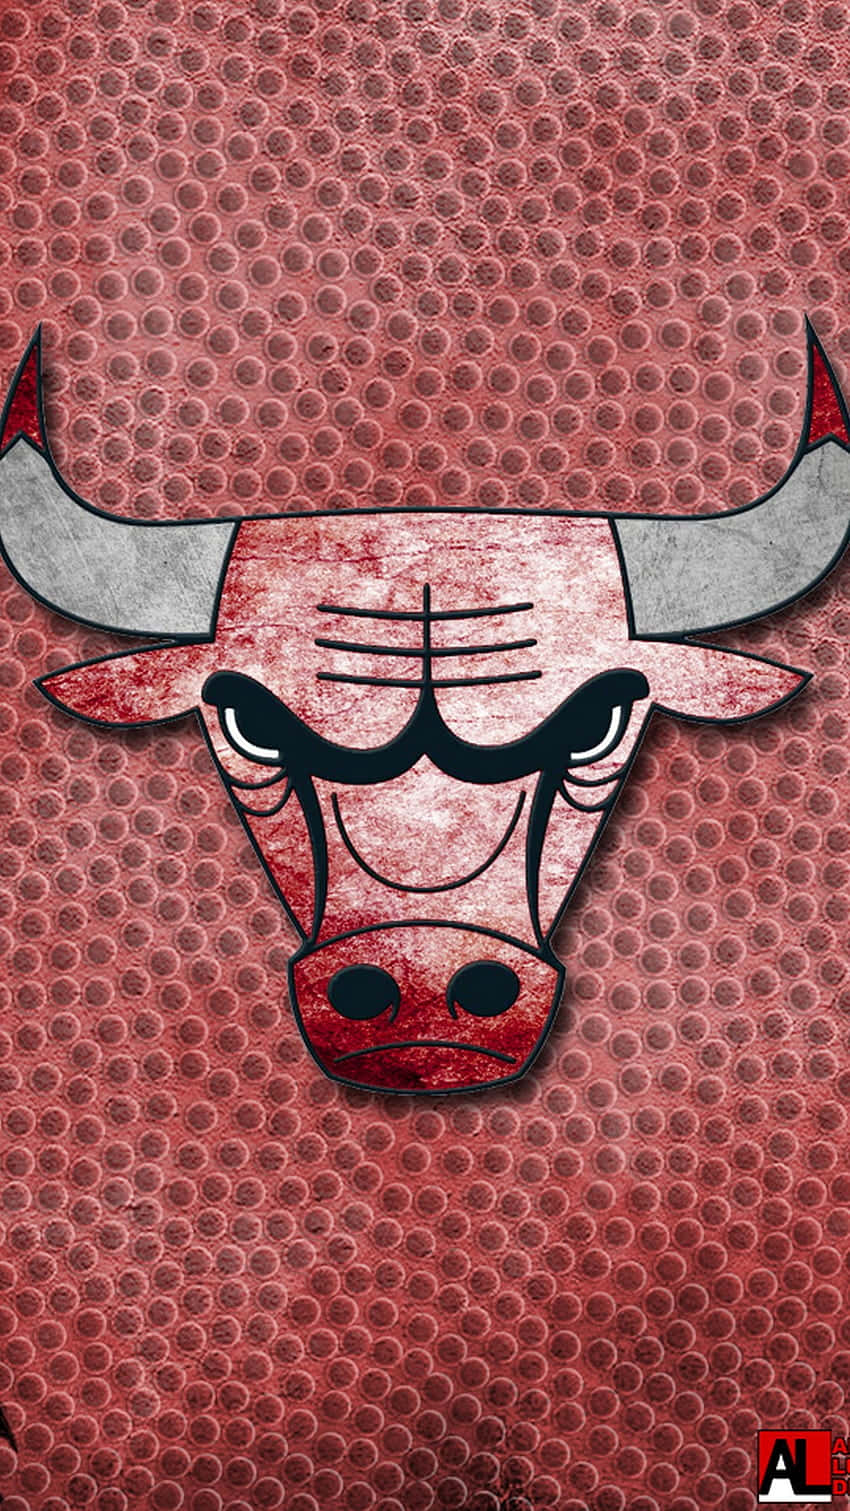 Get Ready To Cheer On Your Favorite Team – Chicago Bulls!